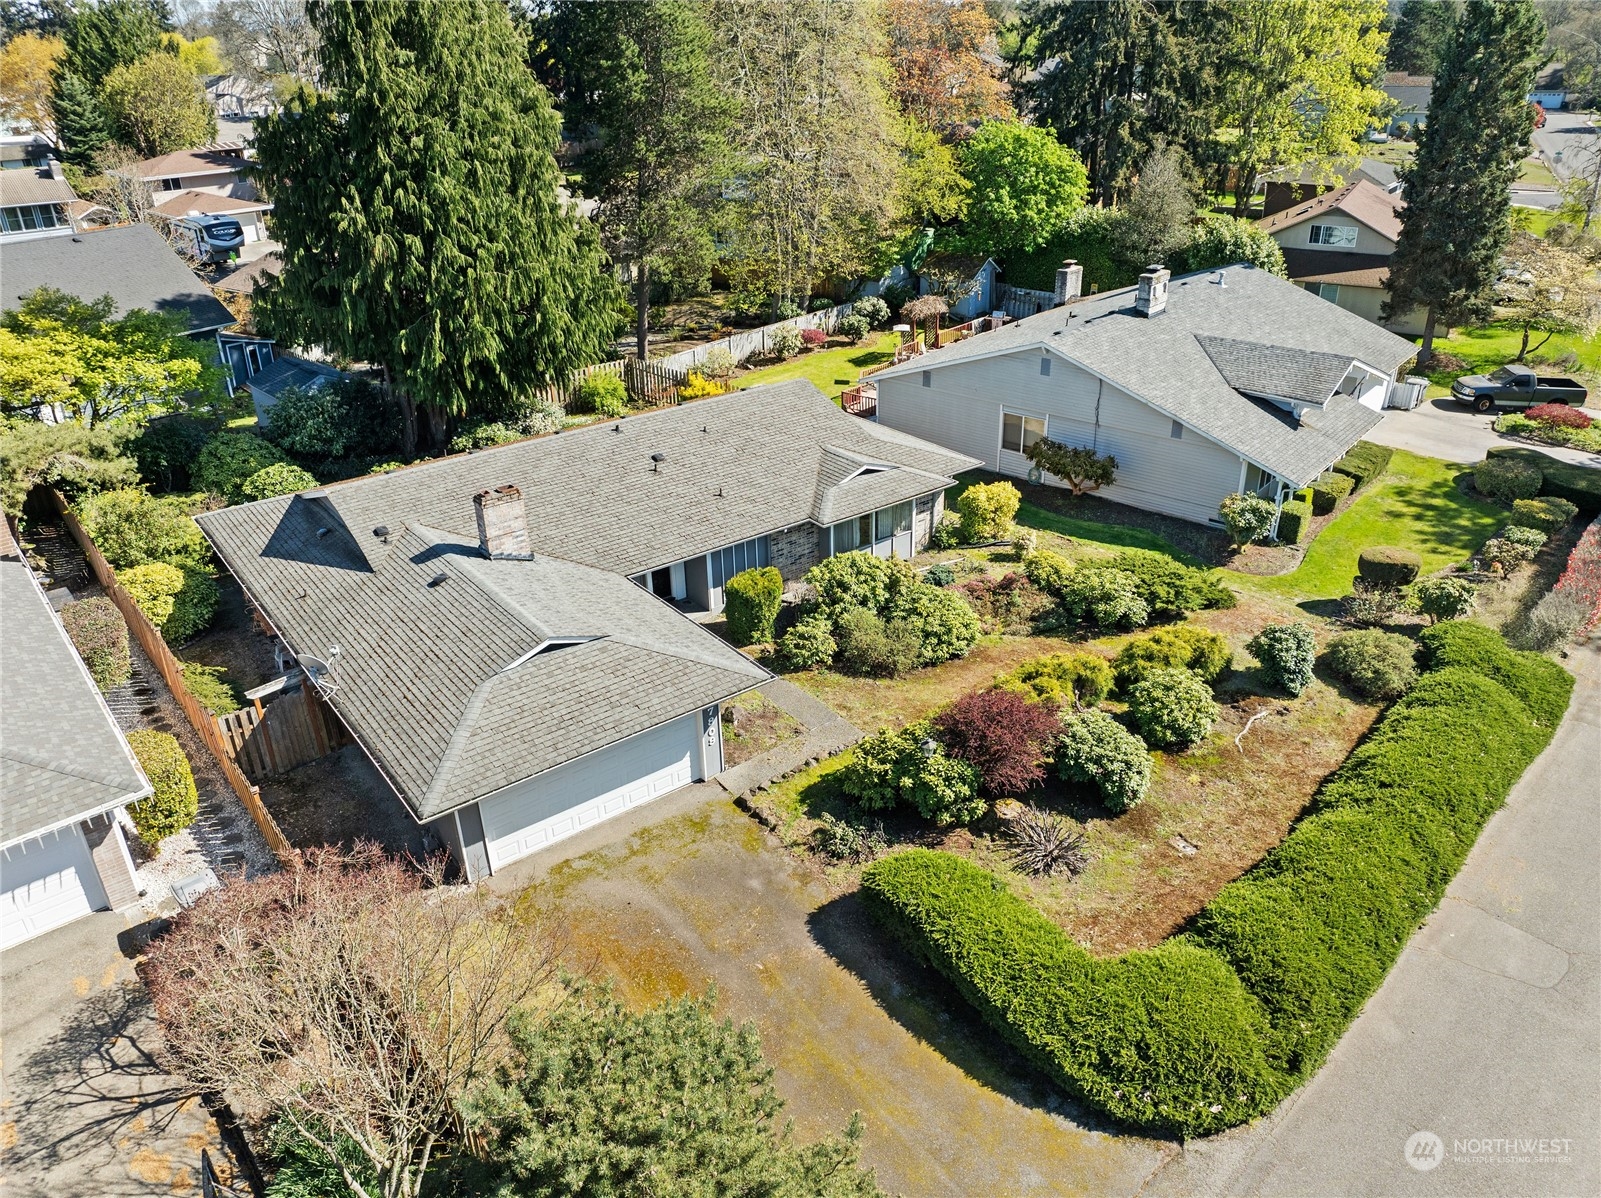 an aerial view of a house with a yard and greenery